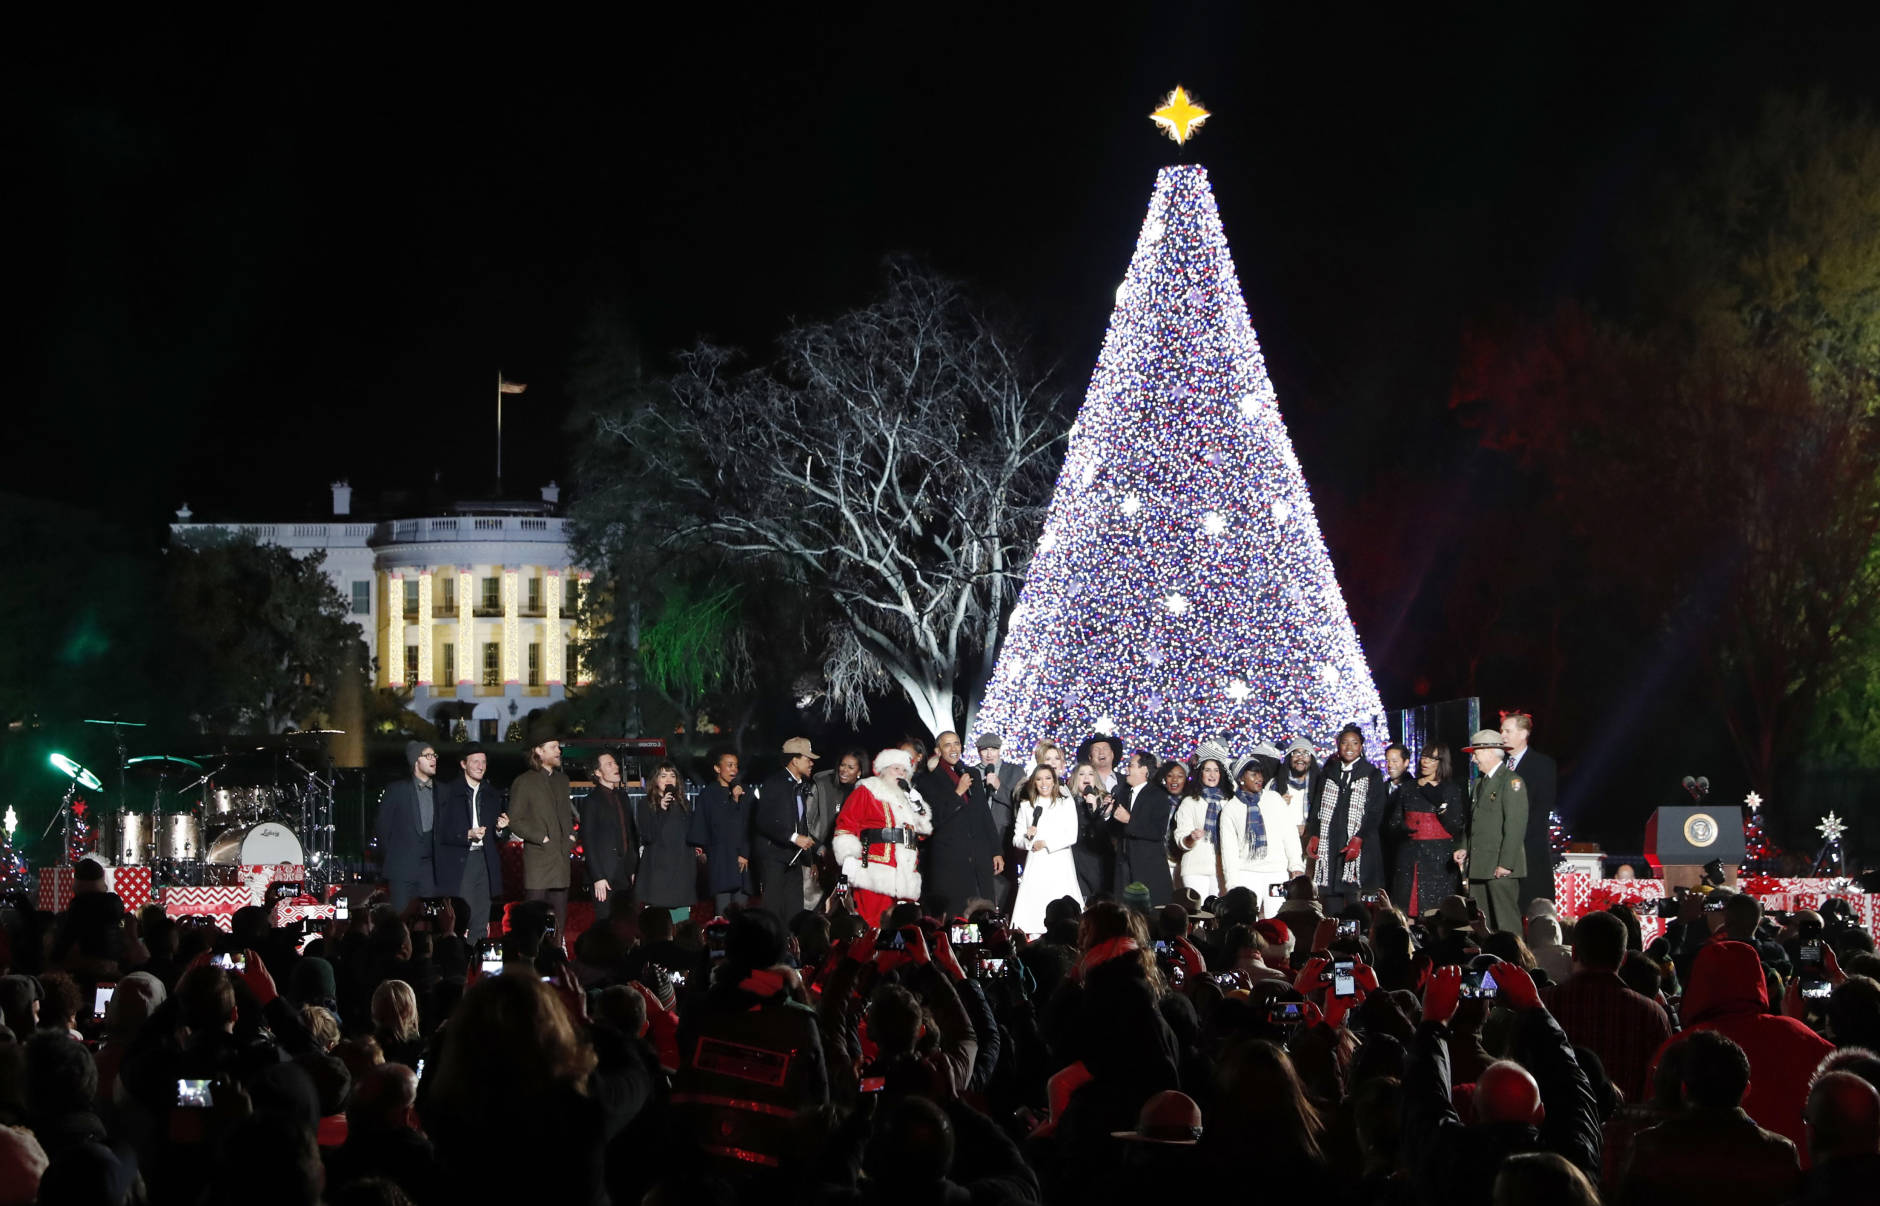 Visitors use their cell phone cameras to capture the moment of the 2016 National Tree lighting. Experts warn consumers should rely only on cellular connections to prevent themselves from being hacked in large crowds. (AP Images)